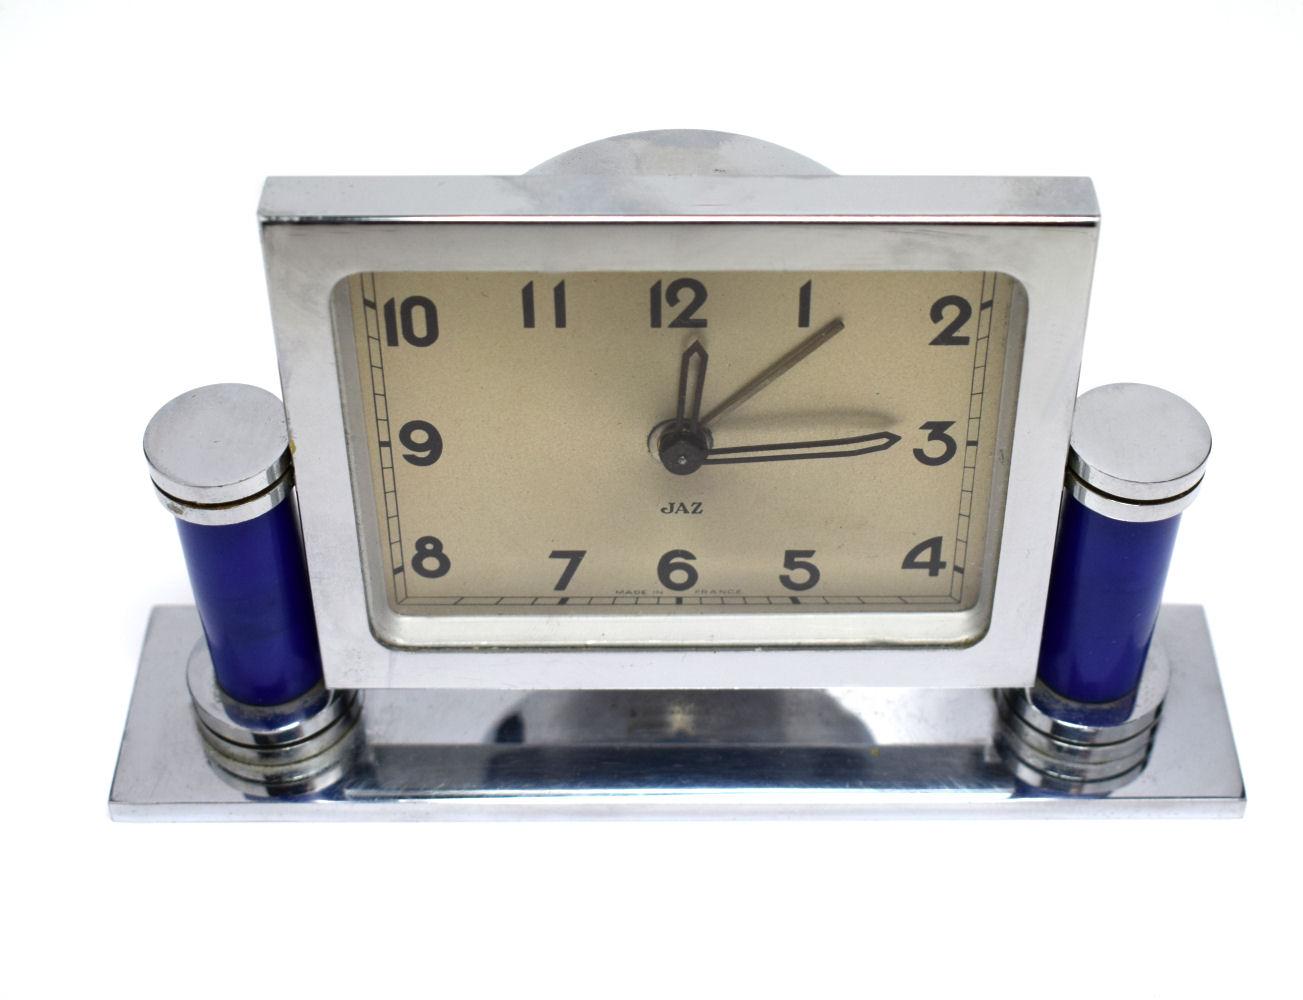 Very stylish 1930s French Art Deco clock by the clock makers JAZ. All chrome casing and plinth with two royal blue pillars. Very good condition overall with only minor signs of age as one would expect from a clock from this era. Quite a weighty